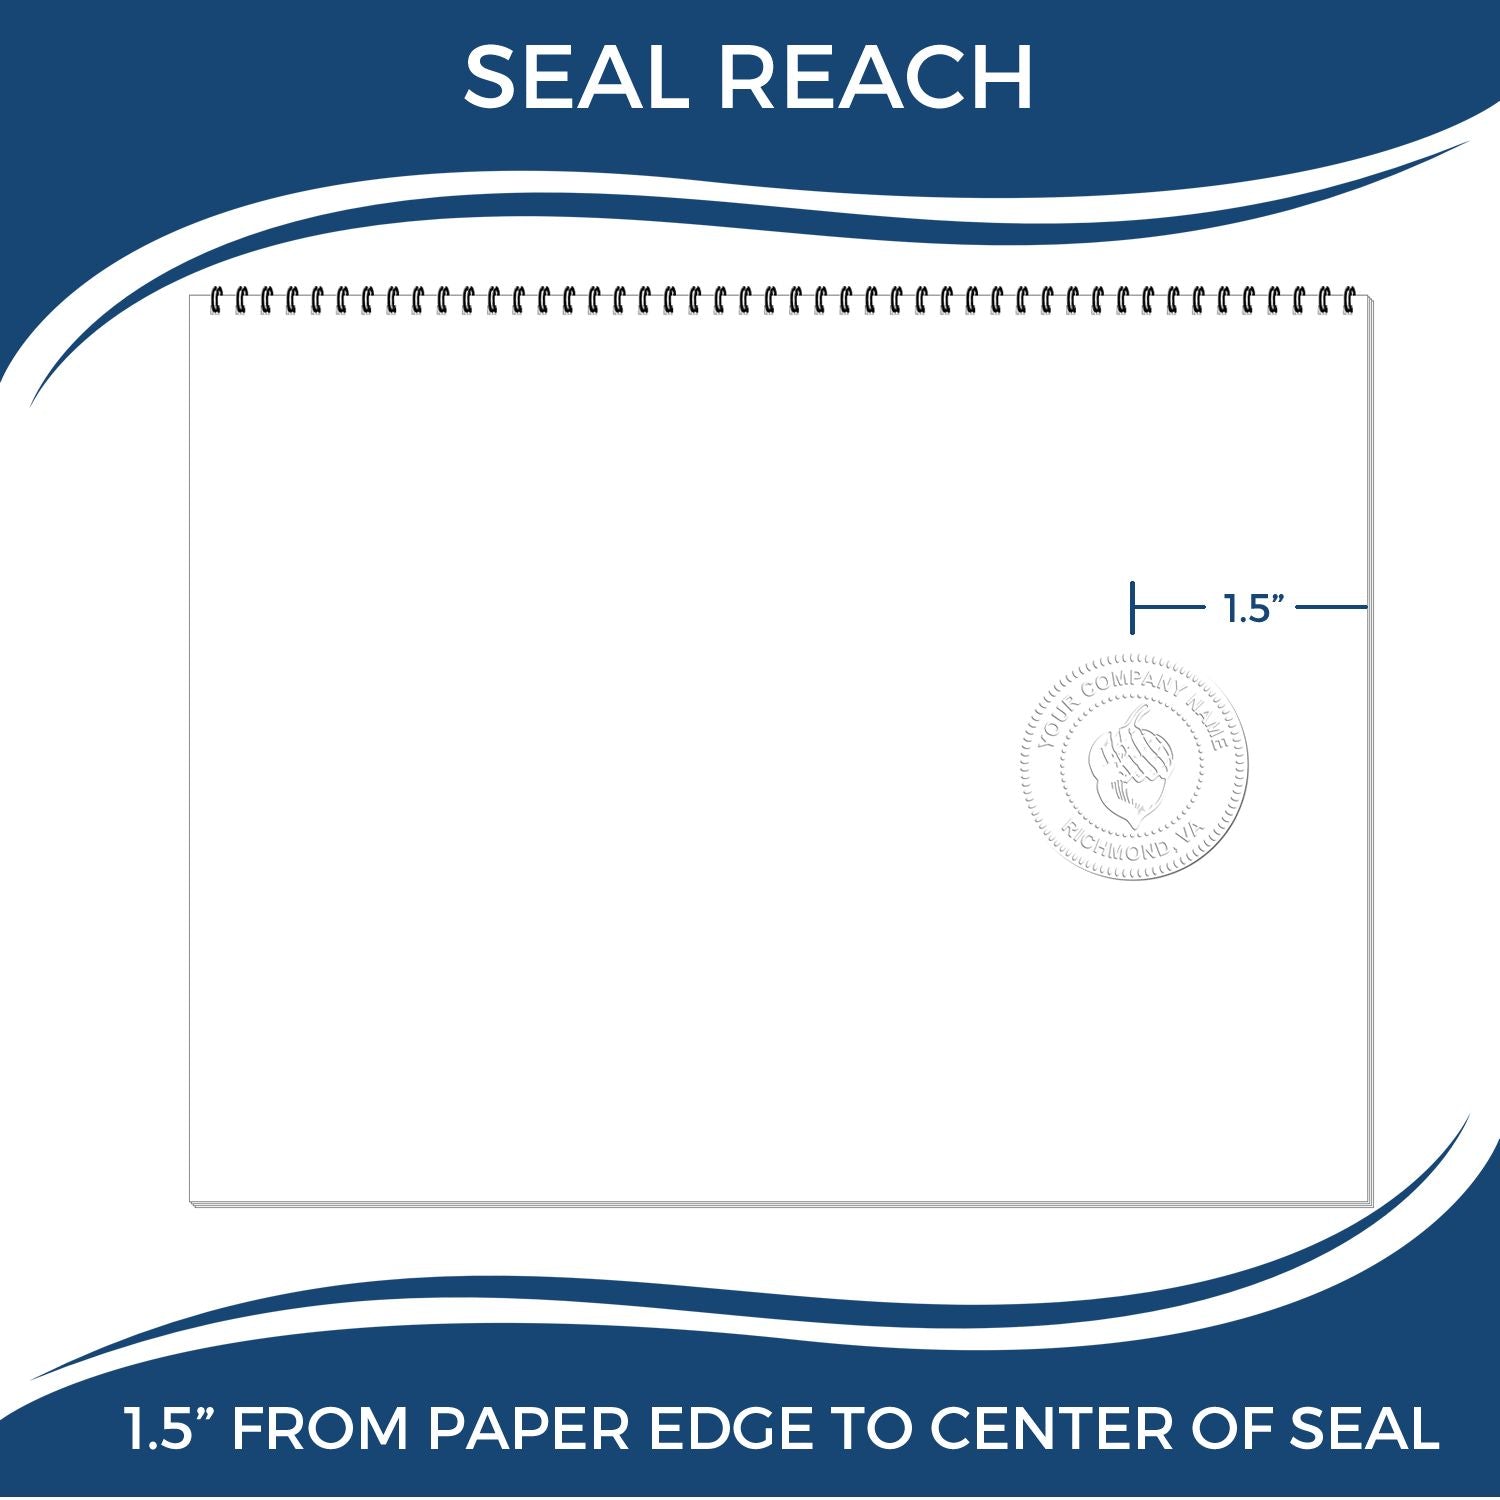 An infographic showing the seal reach which is represented by a ruler and a miniature seal image of the State of Arkansas Architectural Seal Embosser